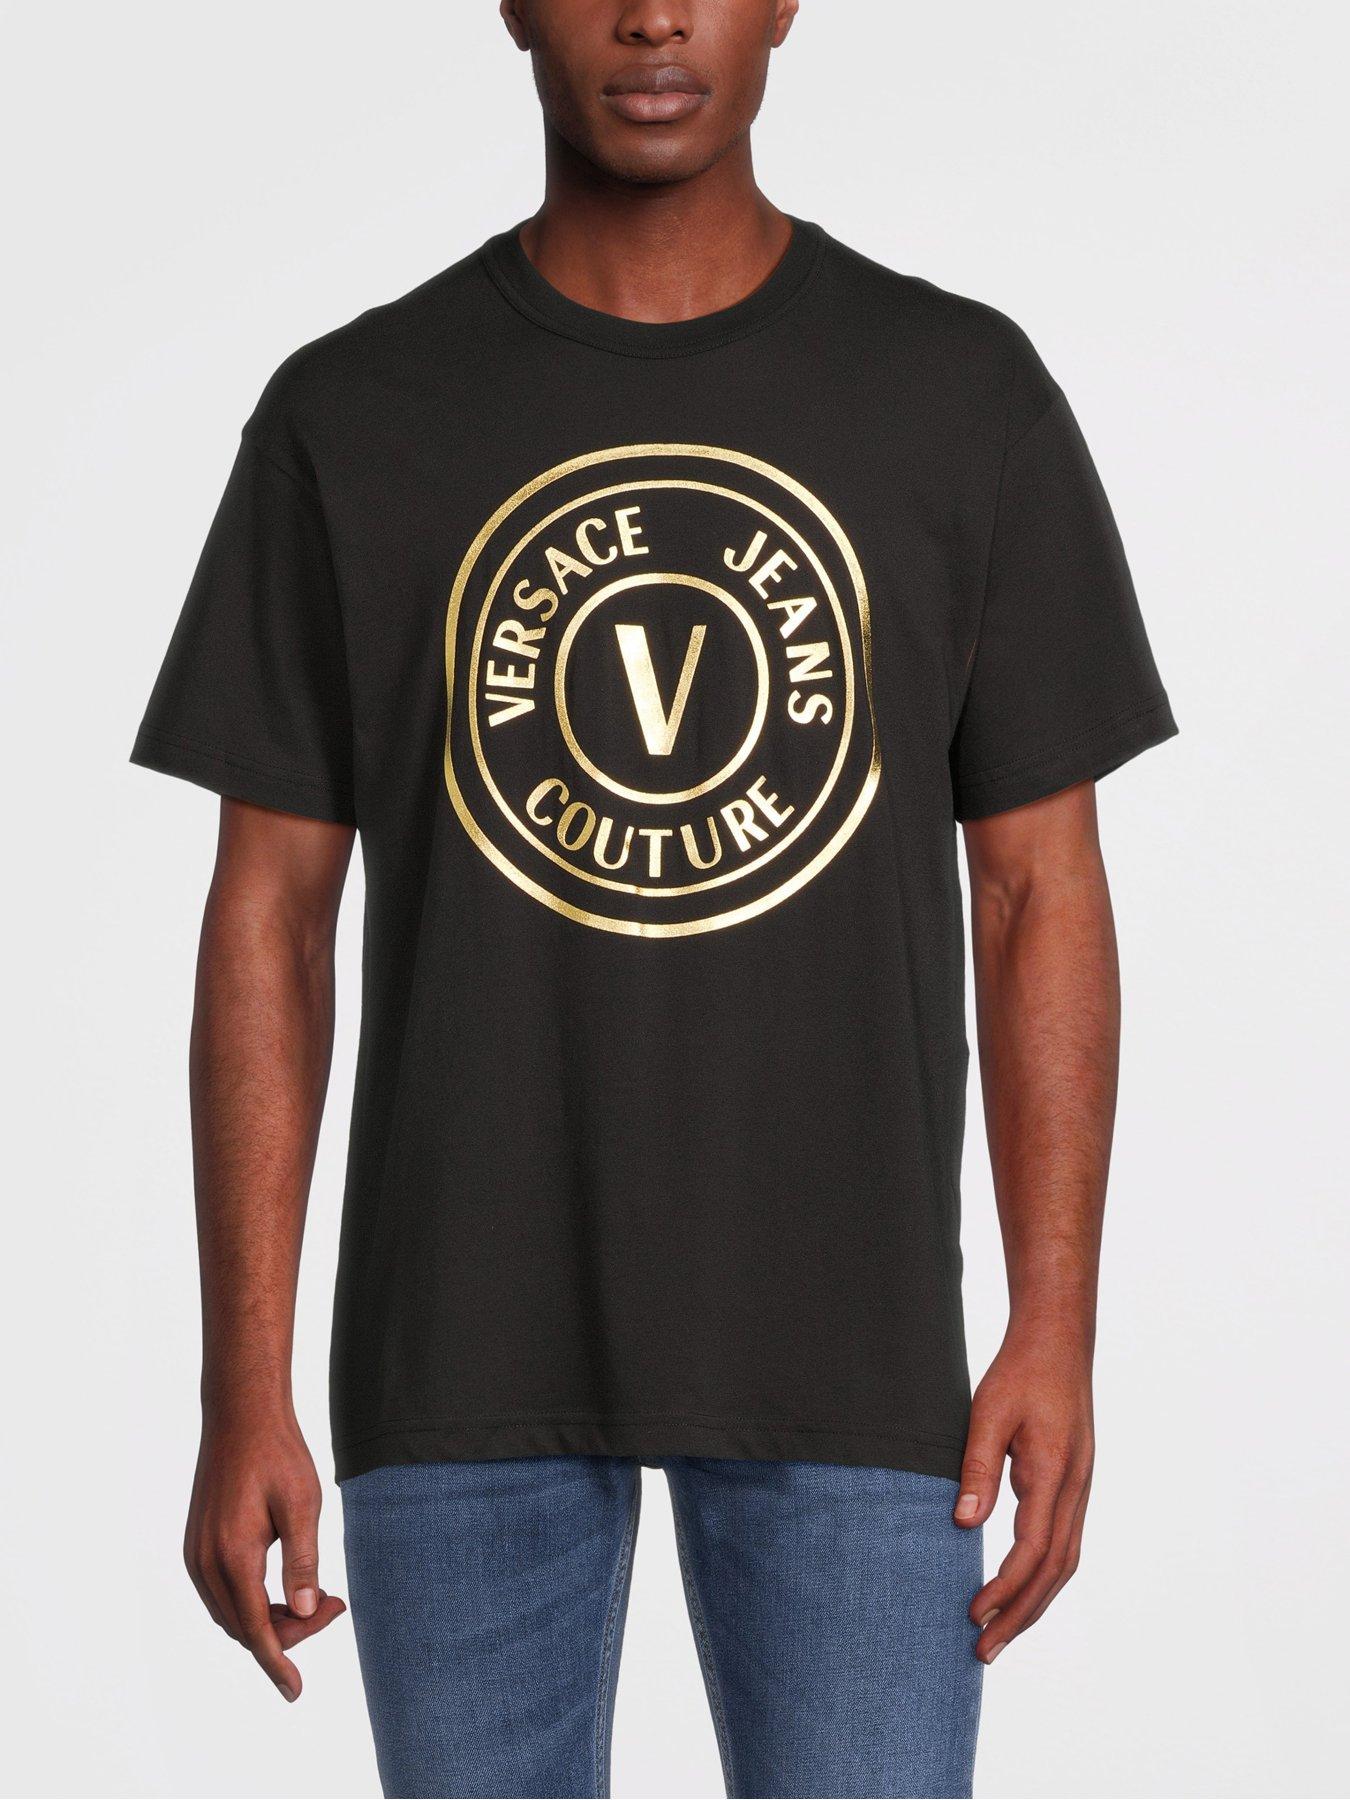 Qqq. VERSACE JEANS COUTURE, Women's Fashion, Tops, Shirts on Carousell